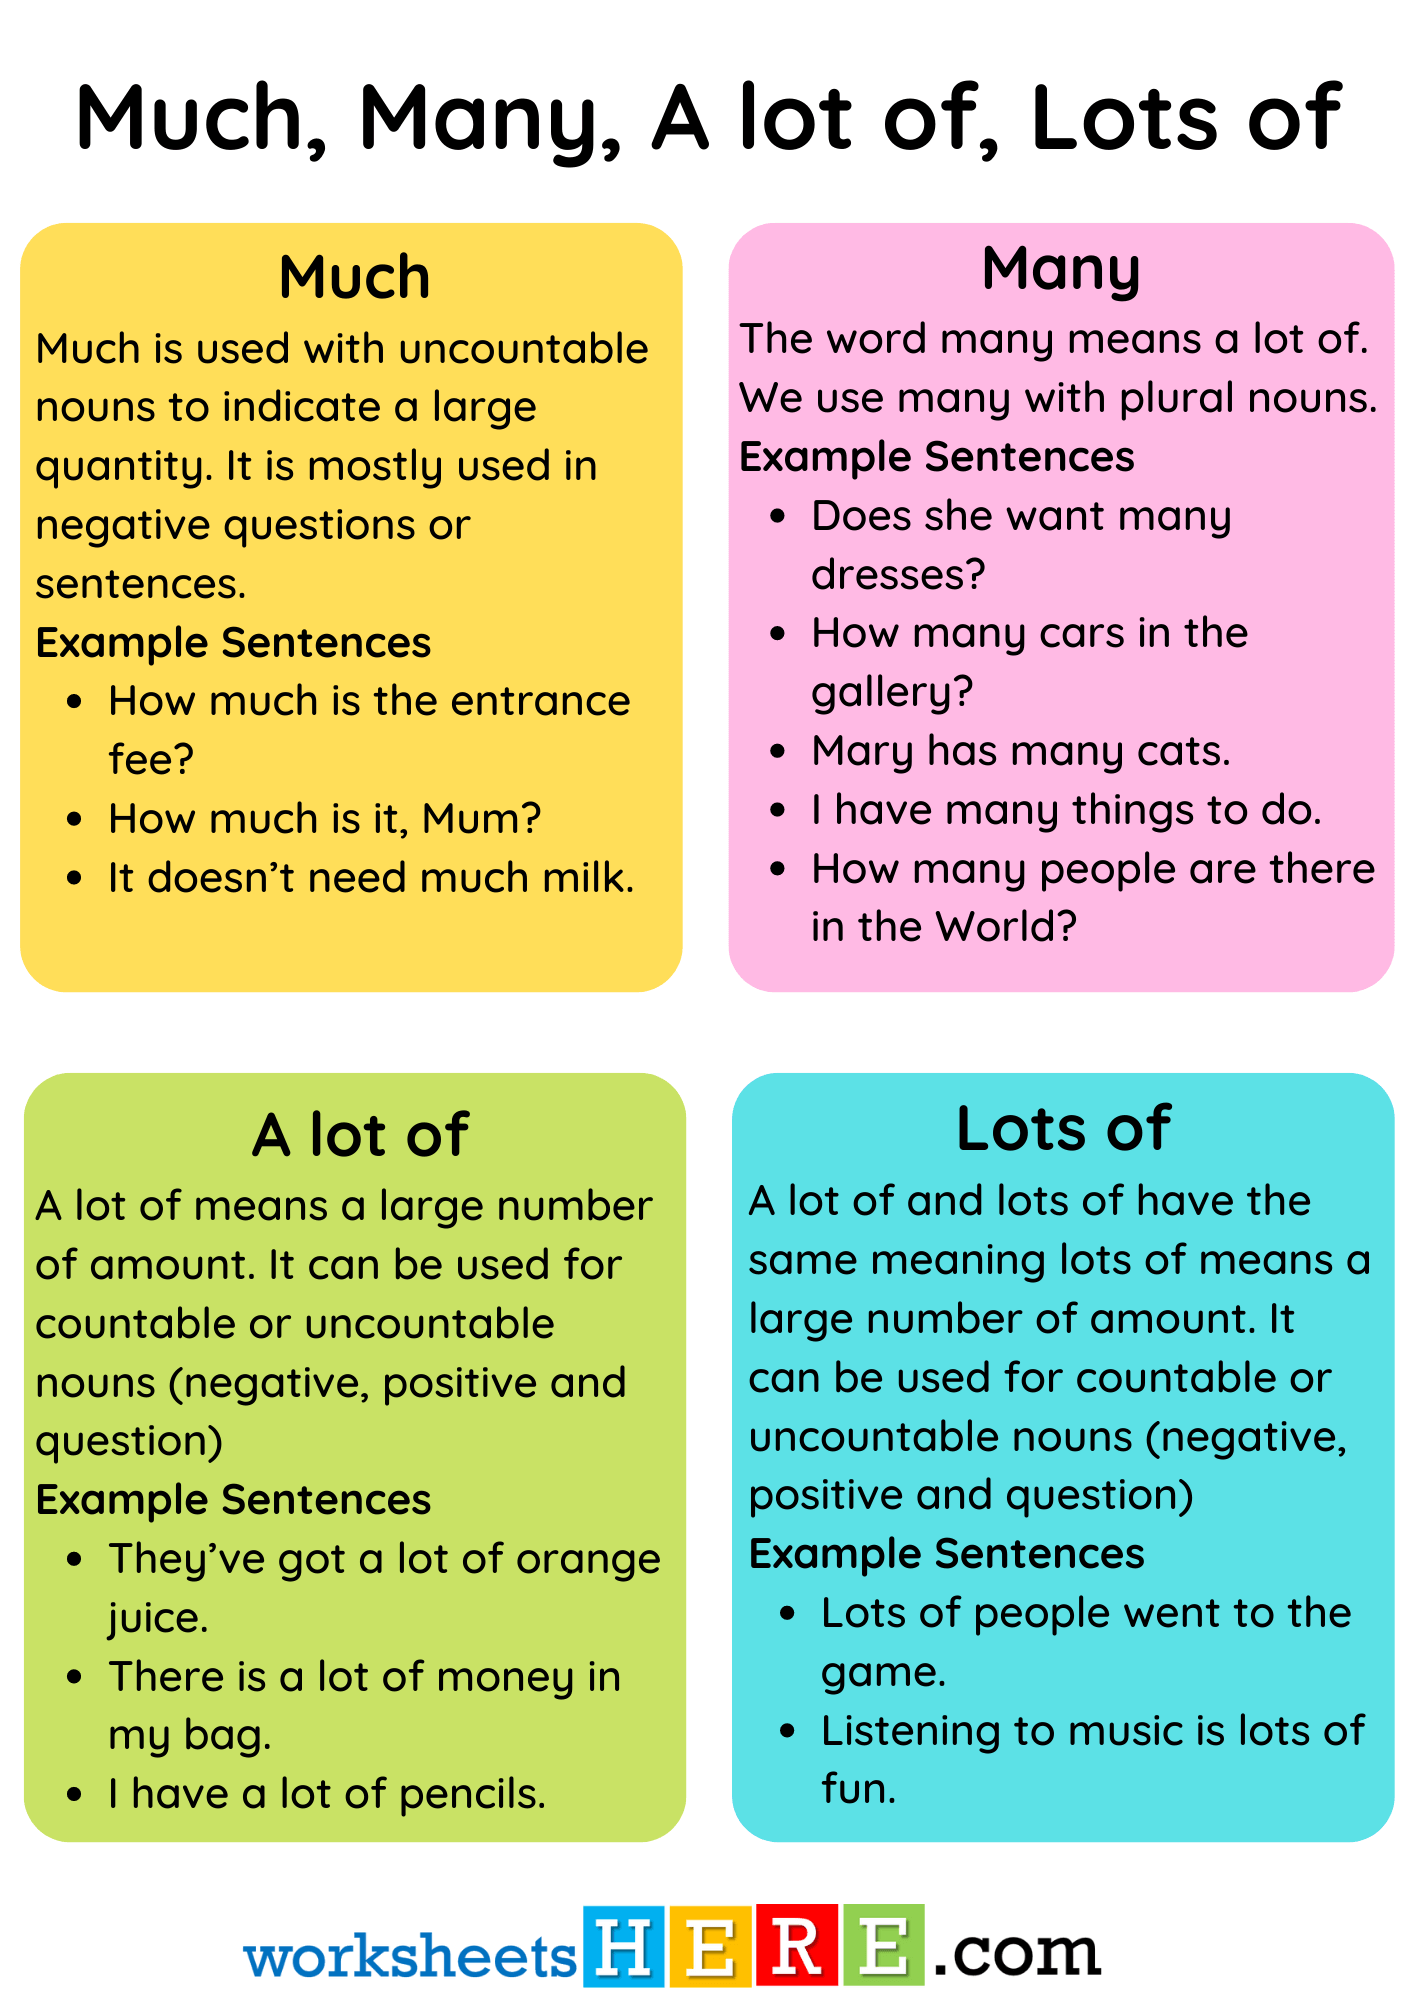 Using Much, Many, A lot of, Lots of, Definition and Example Sentences PDF Worksheet